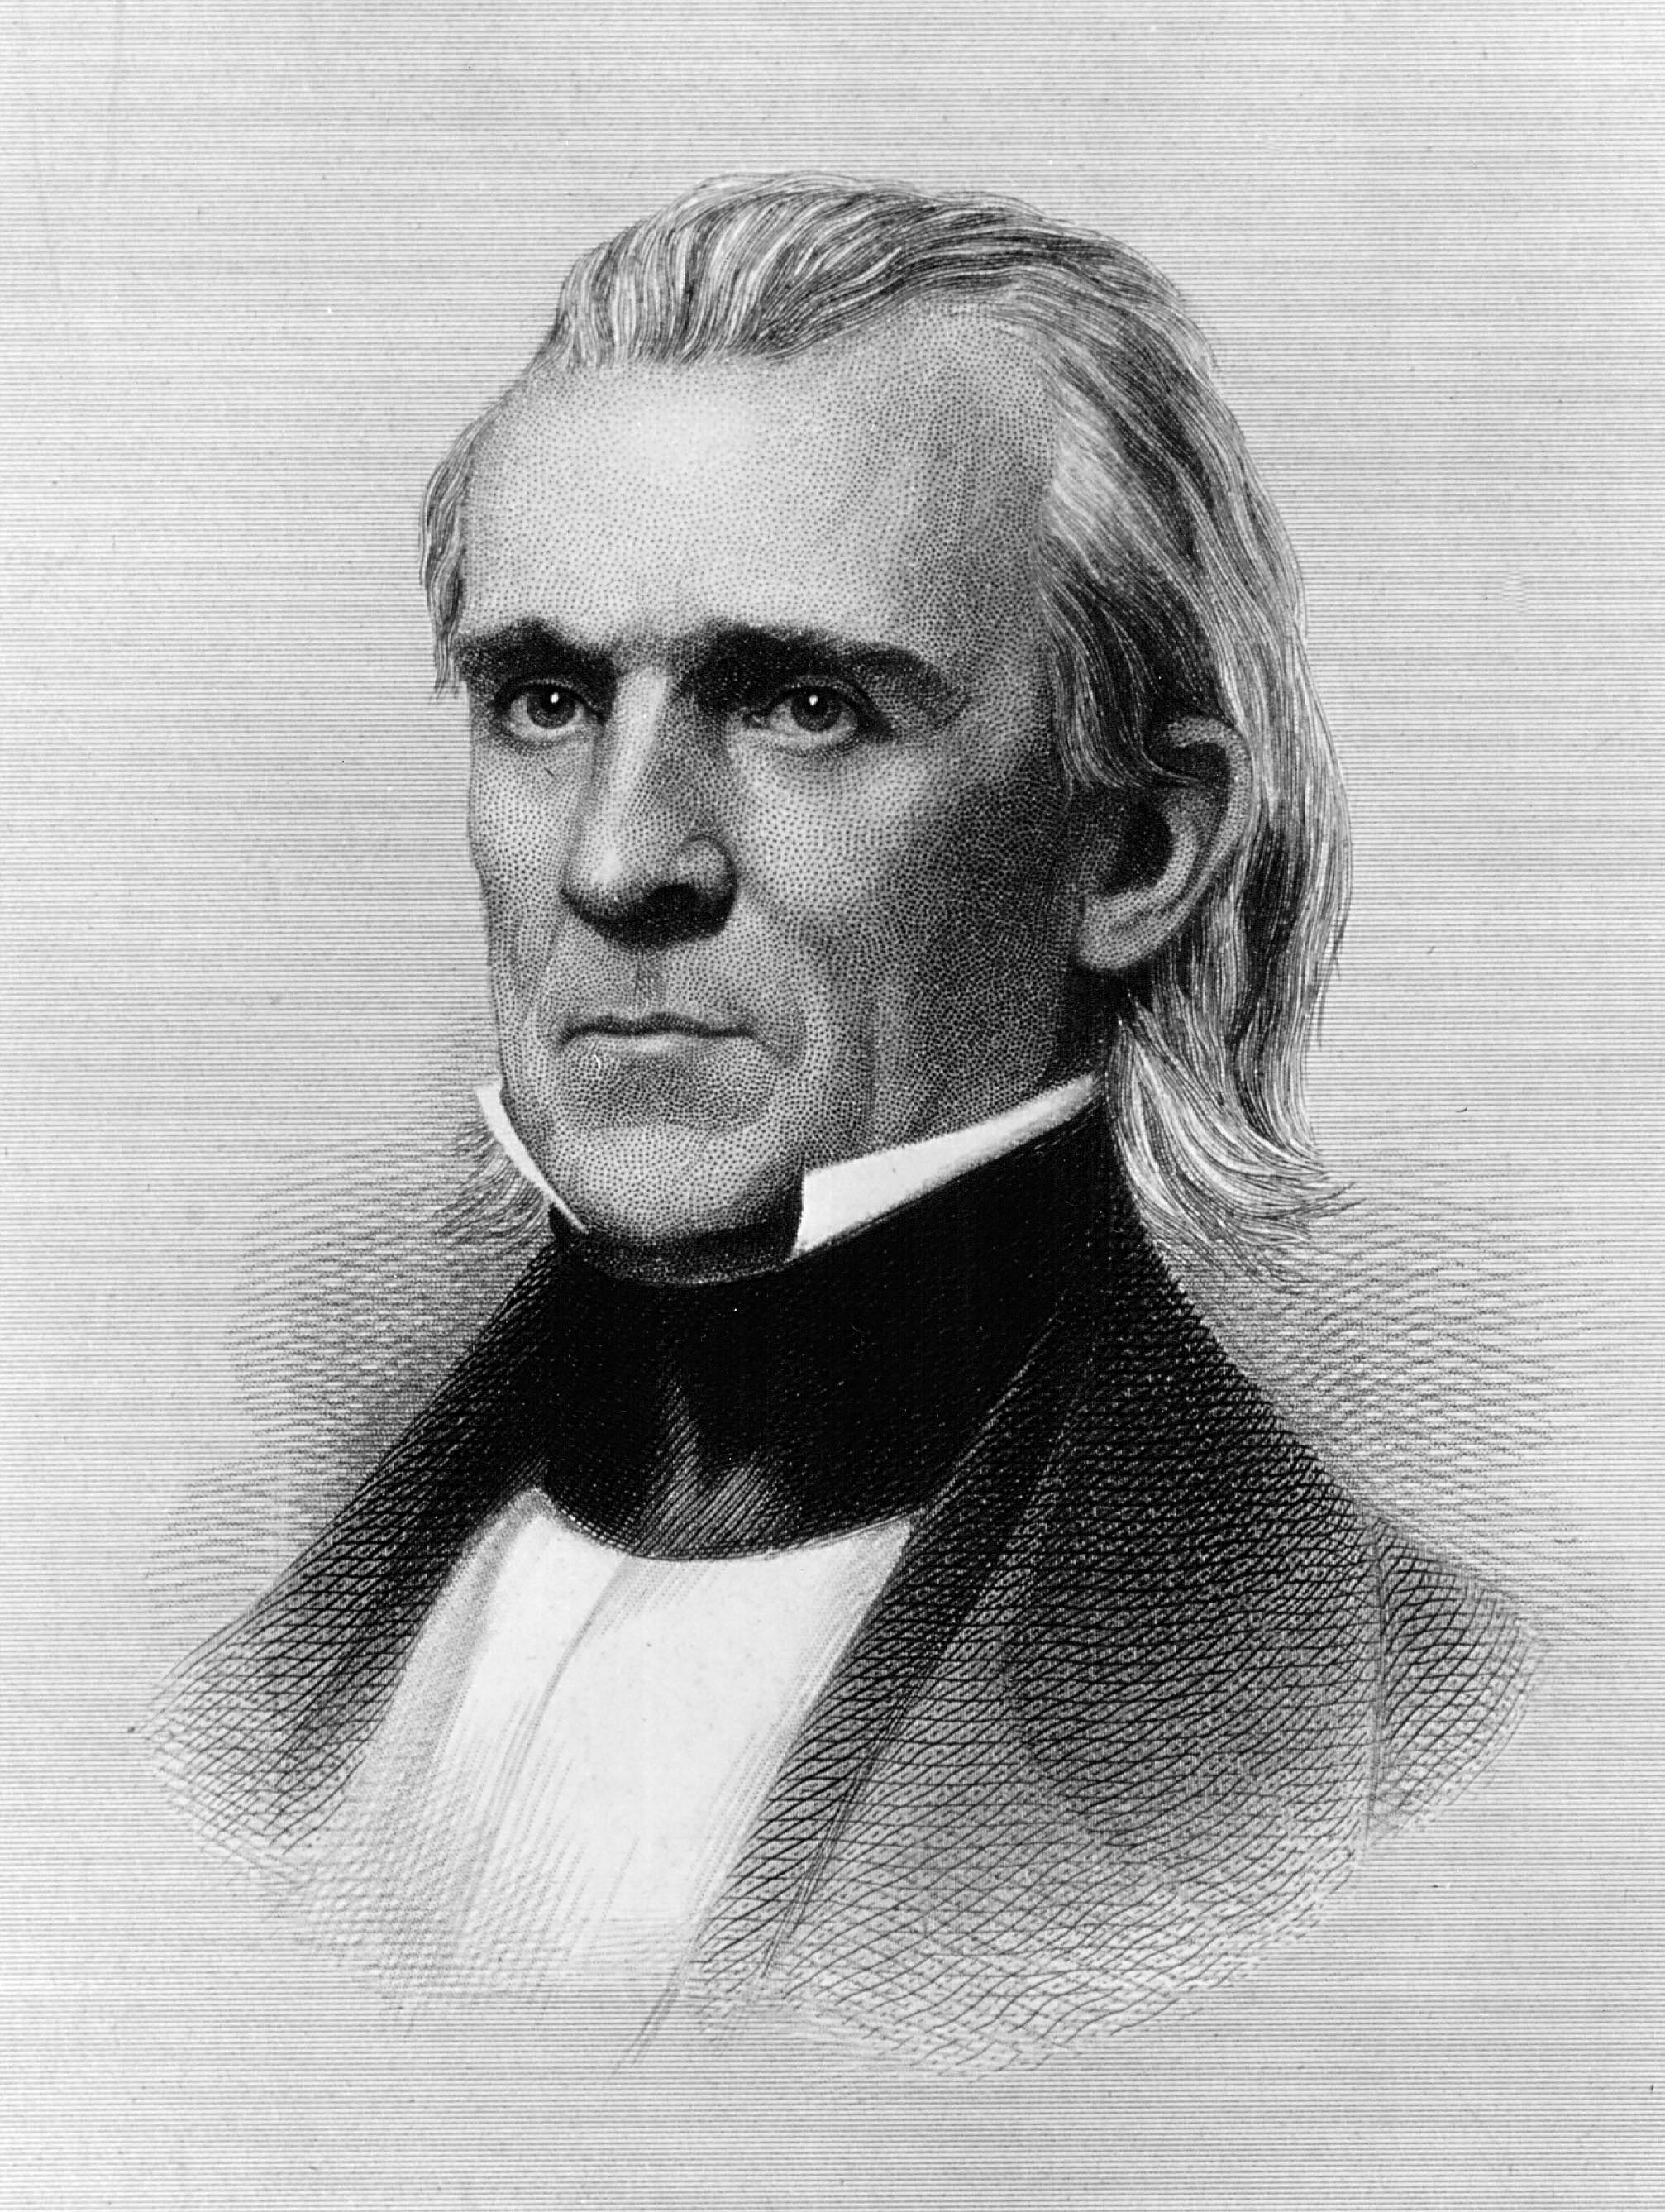 James Knox Polk was the 11th president of the United States and served from 1845 to 1849